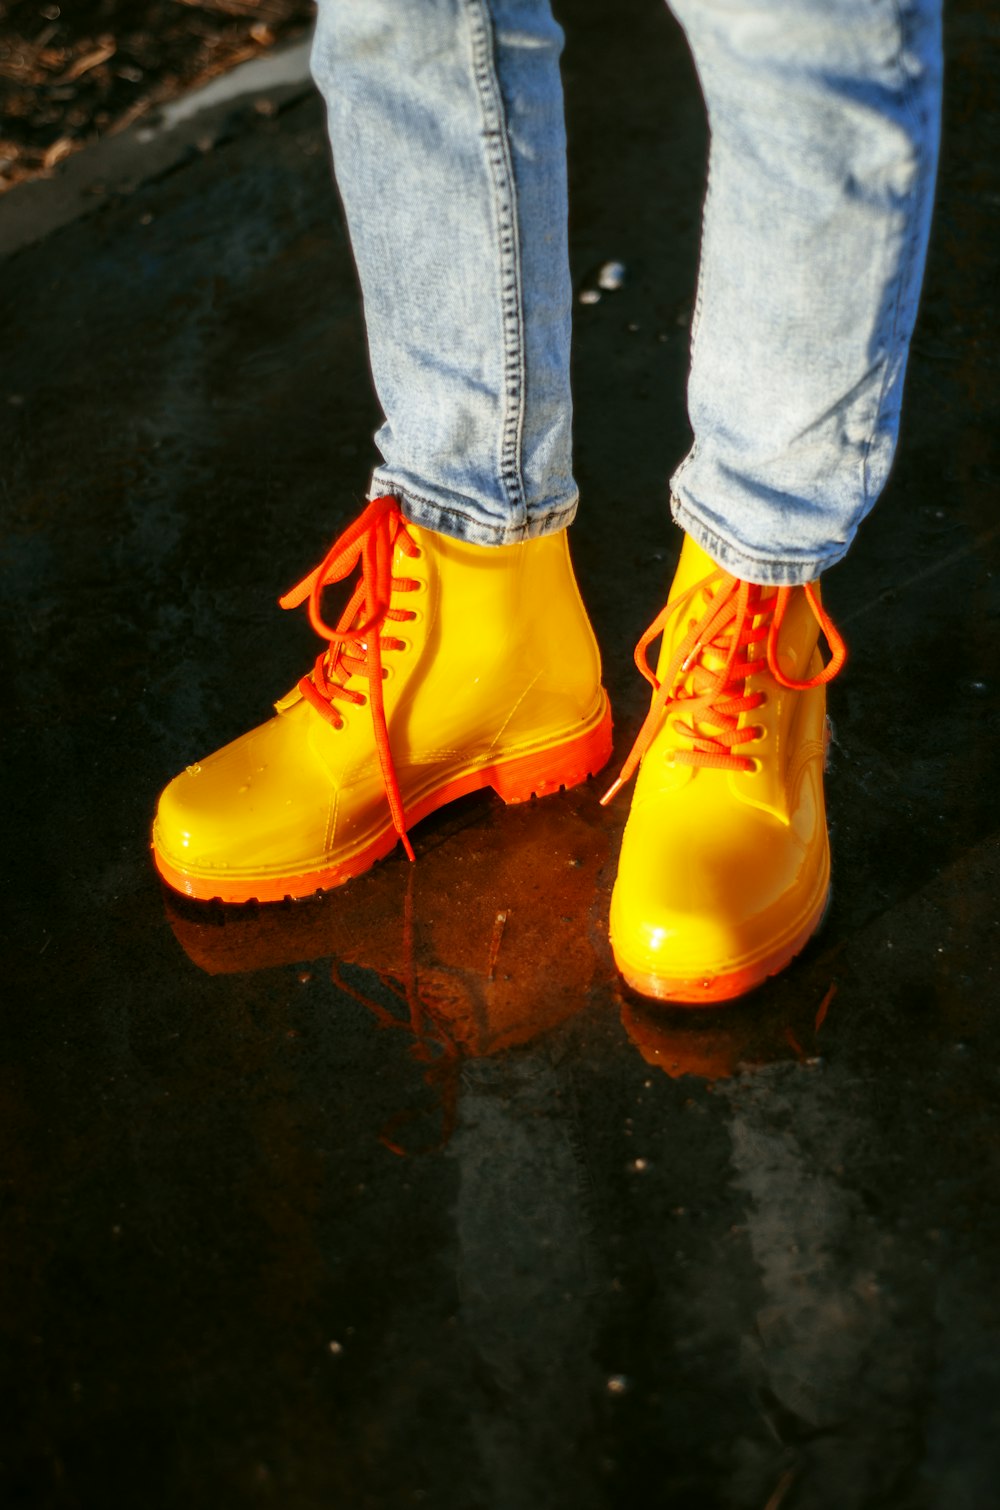 a person wearing yellow rain boots standing on a wet surface